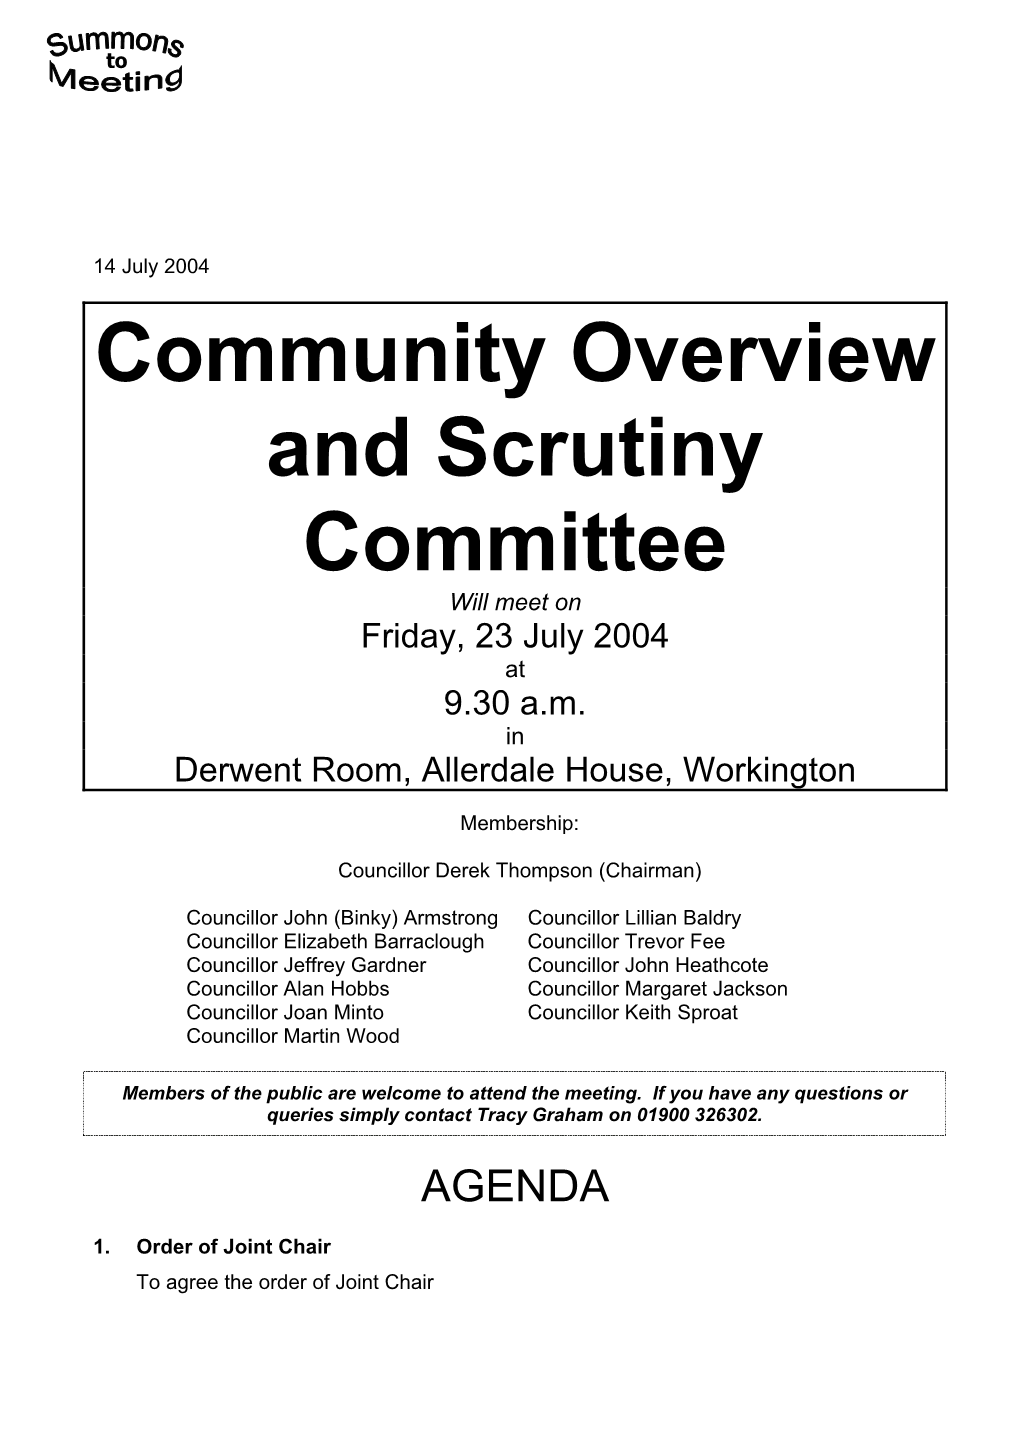 Community Overview and Scrutiny Committee Will Meet on Friday, 23 July 2004 at 9.30 A.M